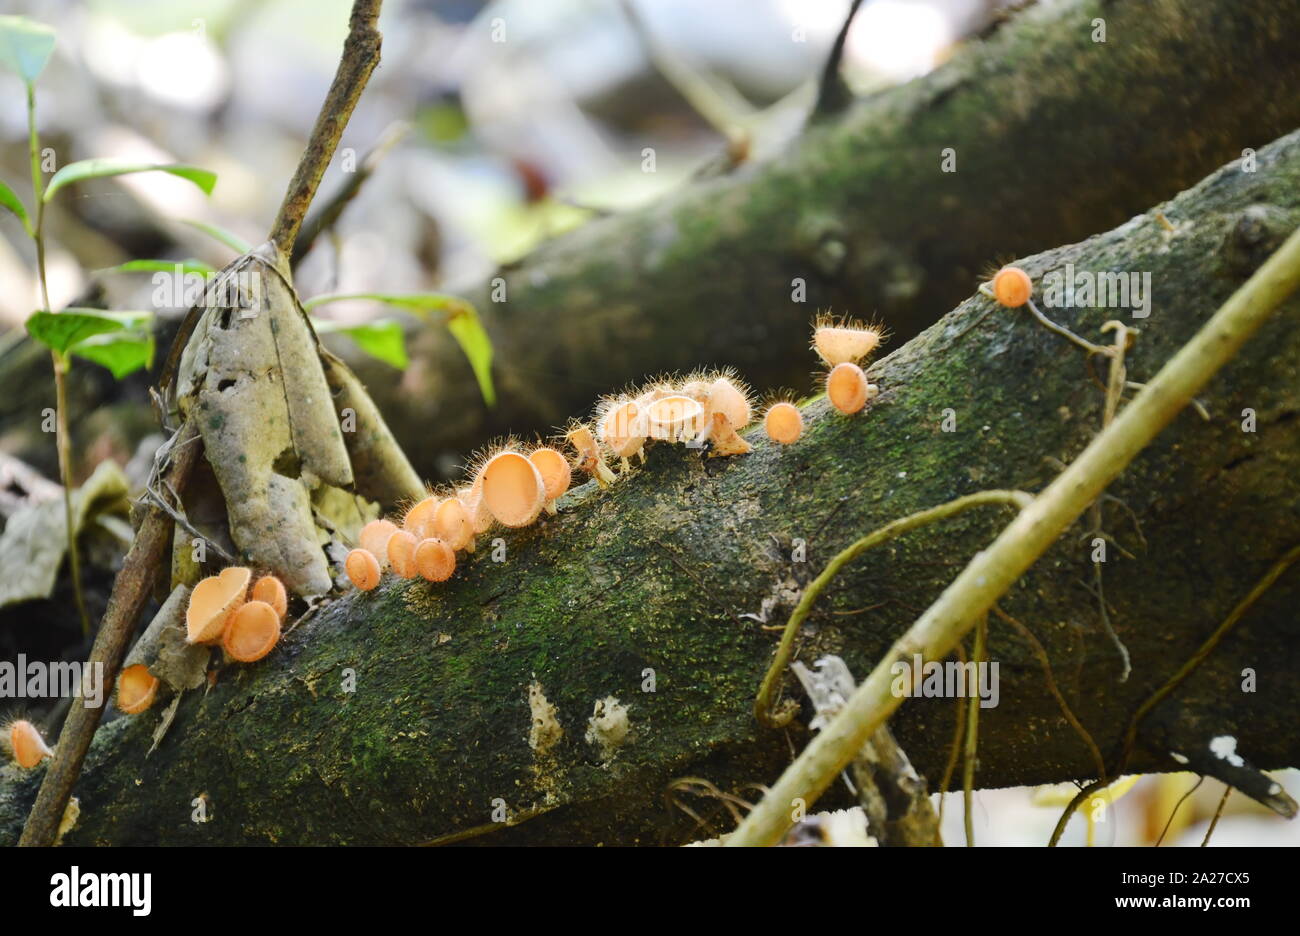 eyelash cup mushroom batch grow up on timber in the forest Stock Photo